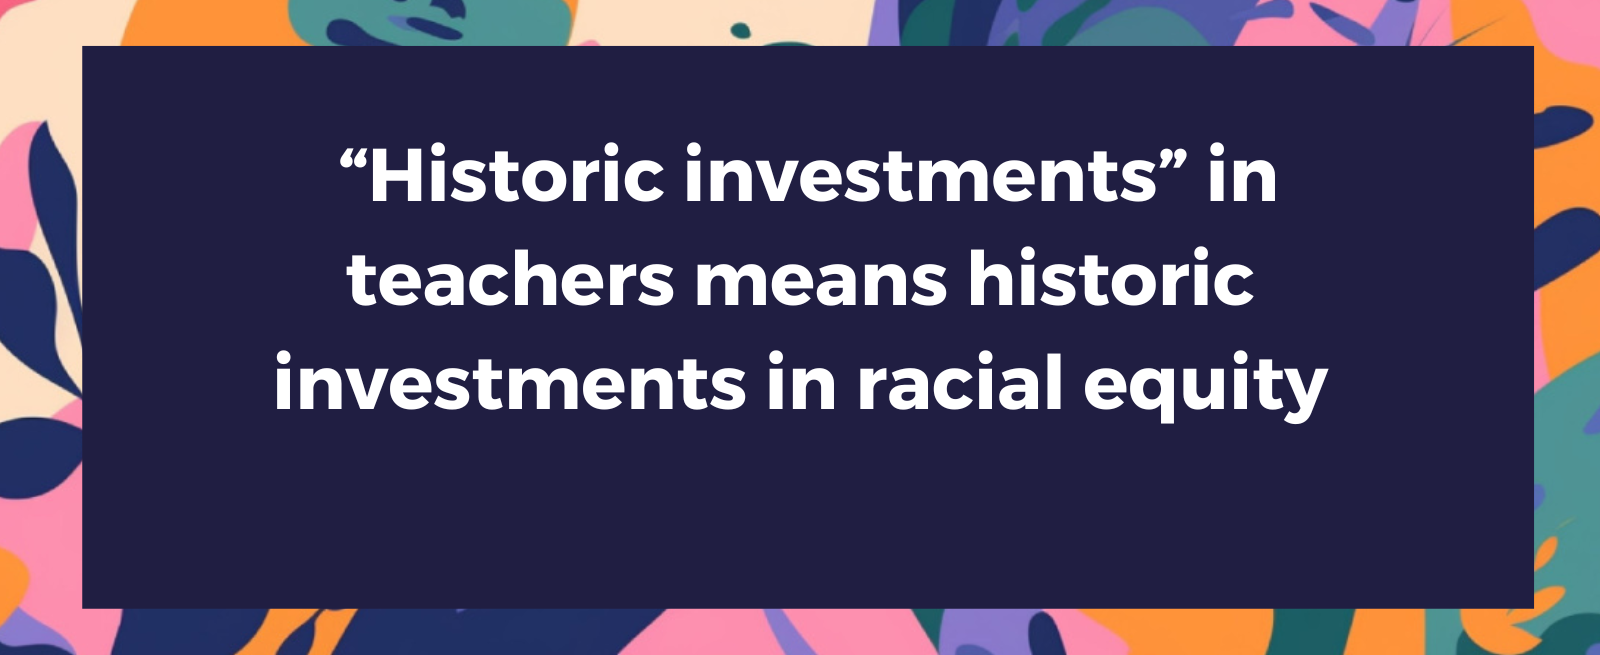 “Historic investments” in teachers should mean historic investments in racial equity